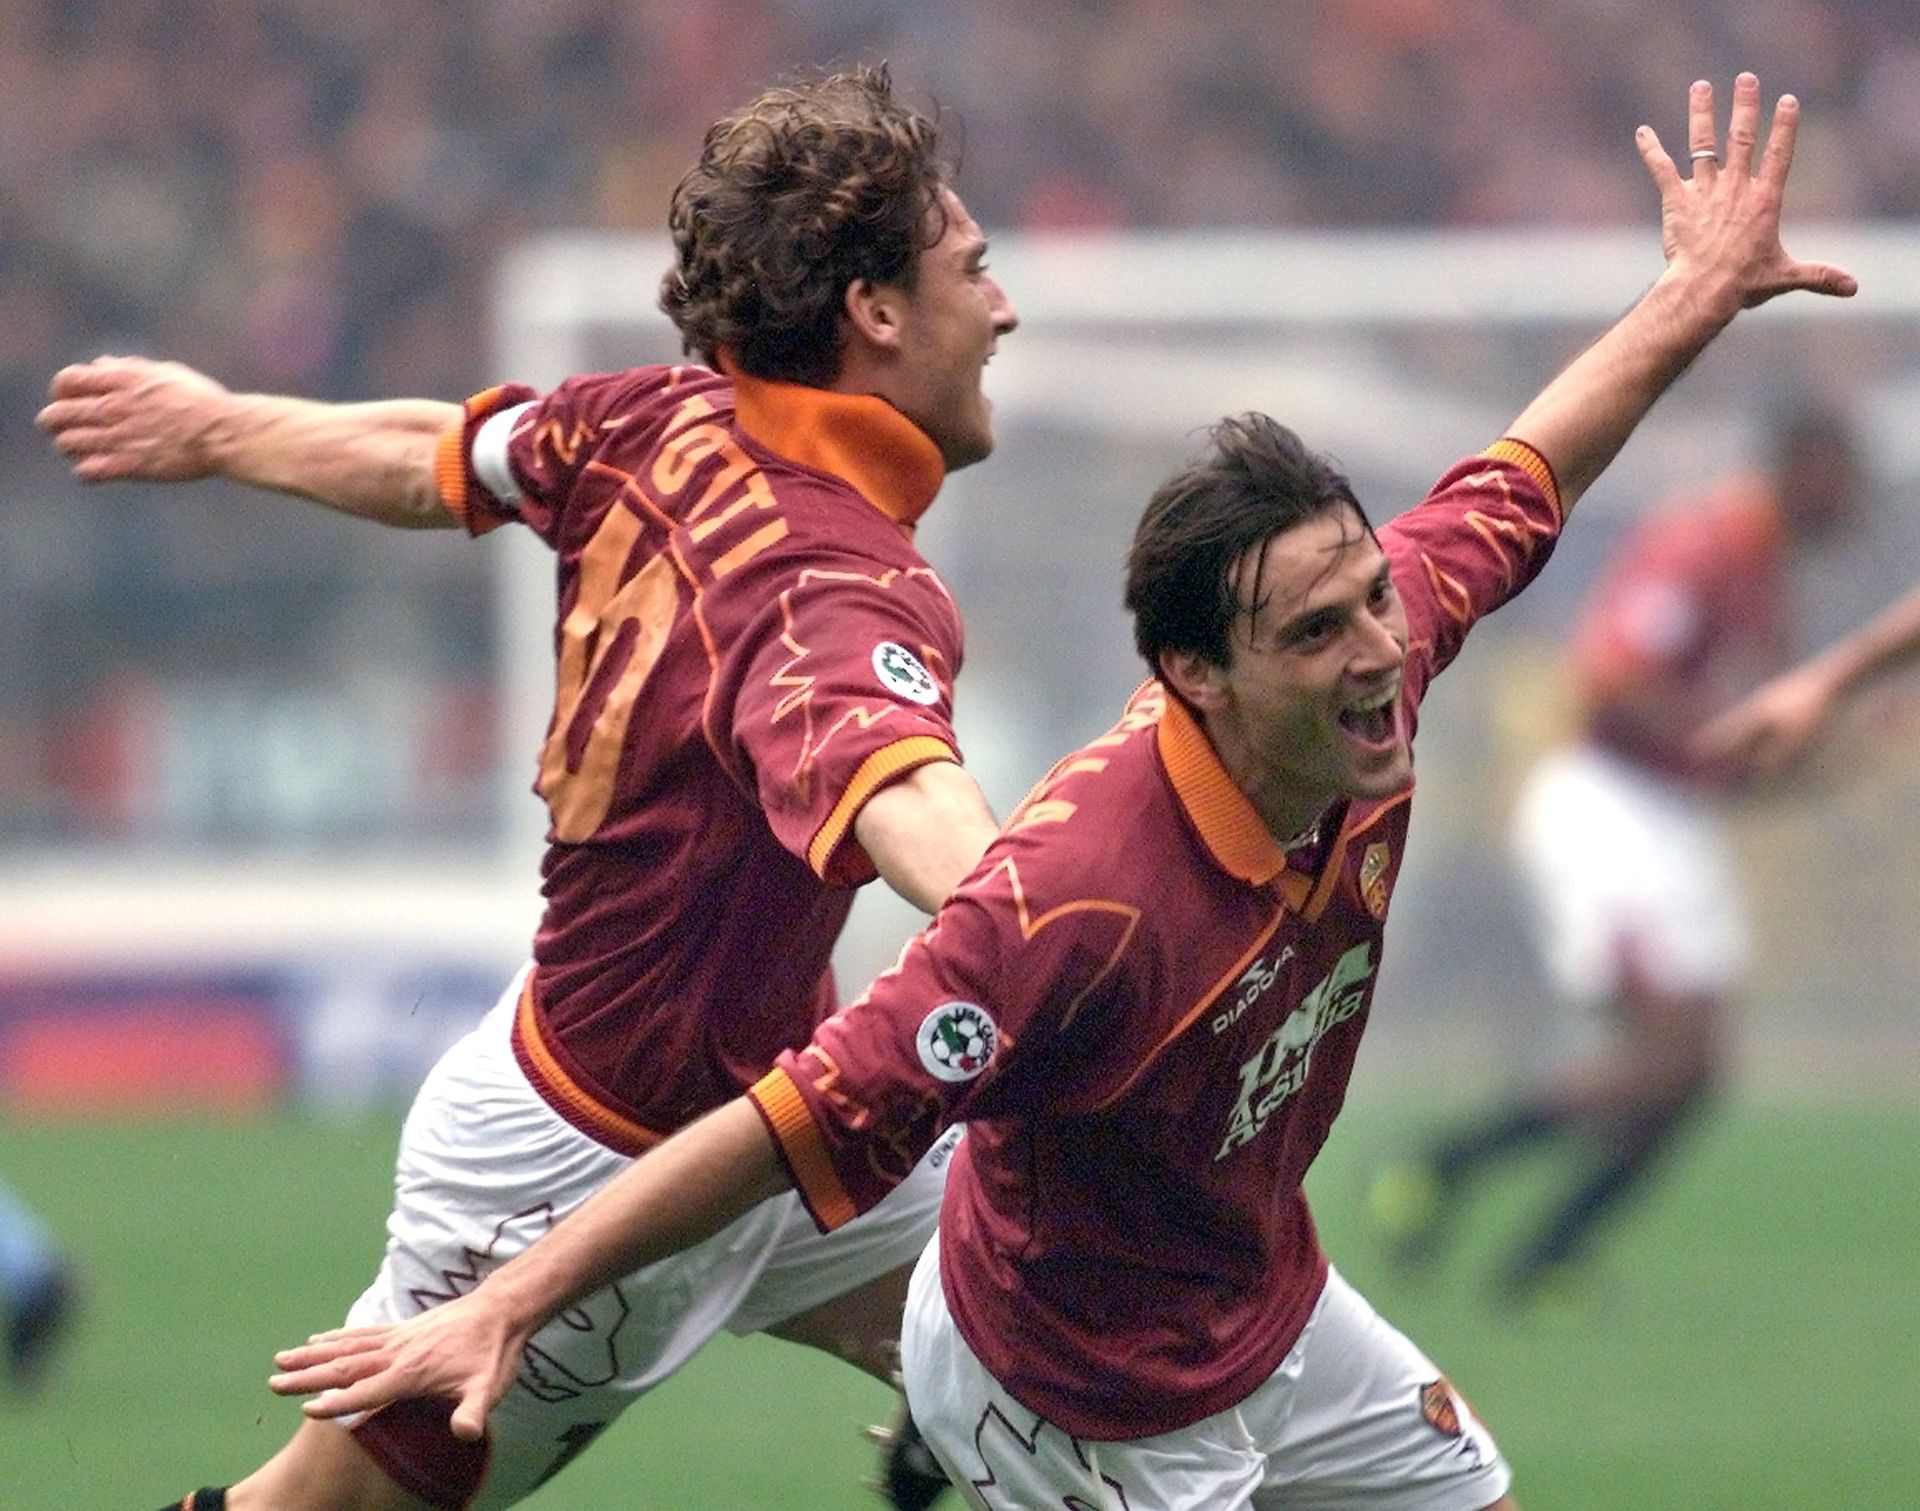 <p>                     Much of Vincenzo Montella's time at Roma was spent on the bench, particularly under Fabio Capello, but the former Italy striker is a folk hero with the capital club.                   </p>                                      <p>                     Montella joined Roma from Sampdoria for €25.82m in 1999 and would go on to score 101 goals for the Giallorossi in 258 appearances. He netted important goals as Roma won the Scudetto in 2000/01 and famously hit four in a 5-1 over Lazio in March 2002.                   </p>